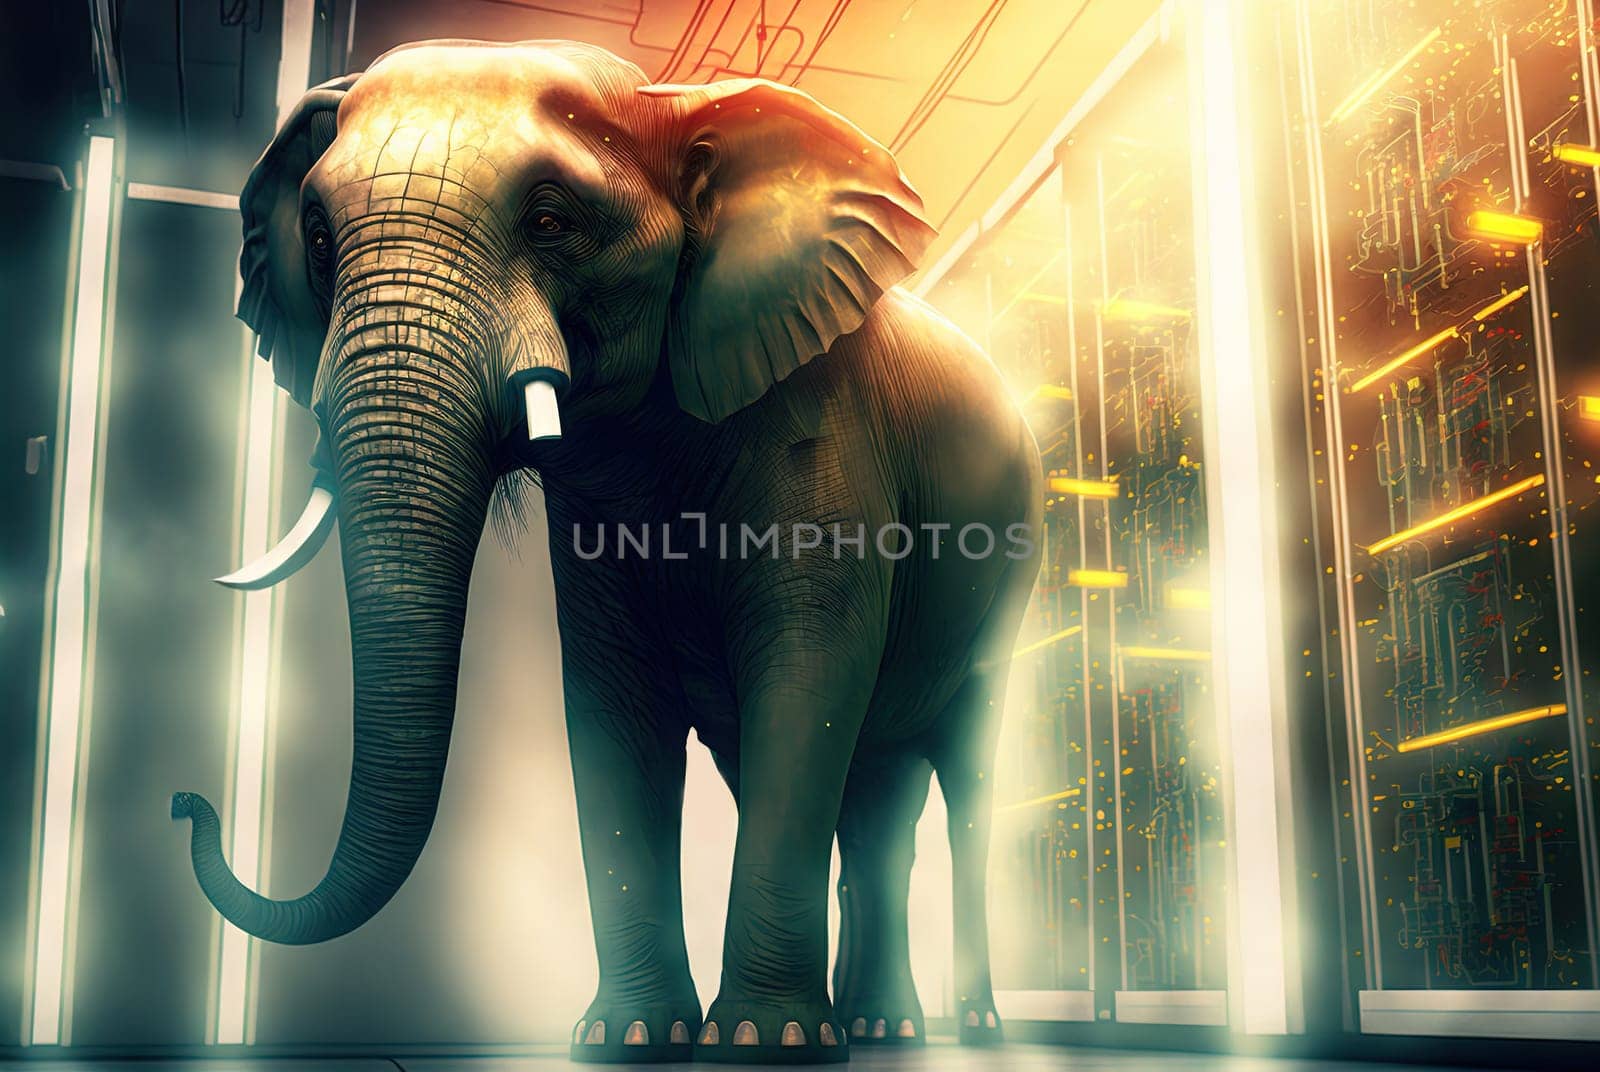 Elephant in the server room. Concept of the big data and digital fragility. Generated AI. by SwillKch